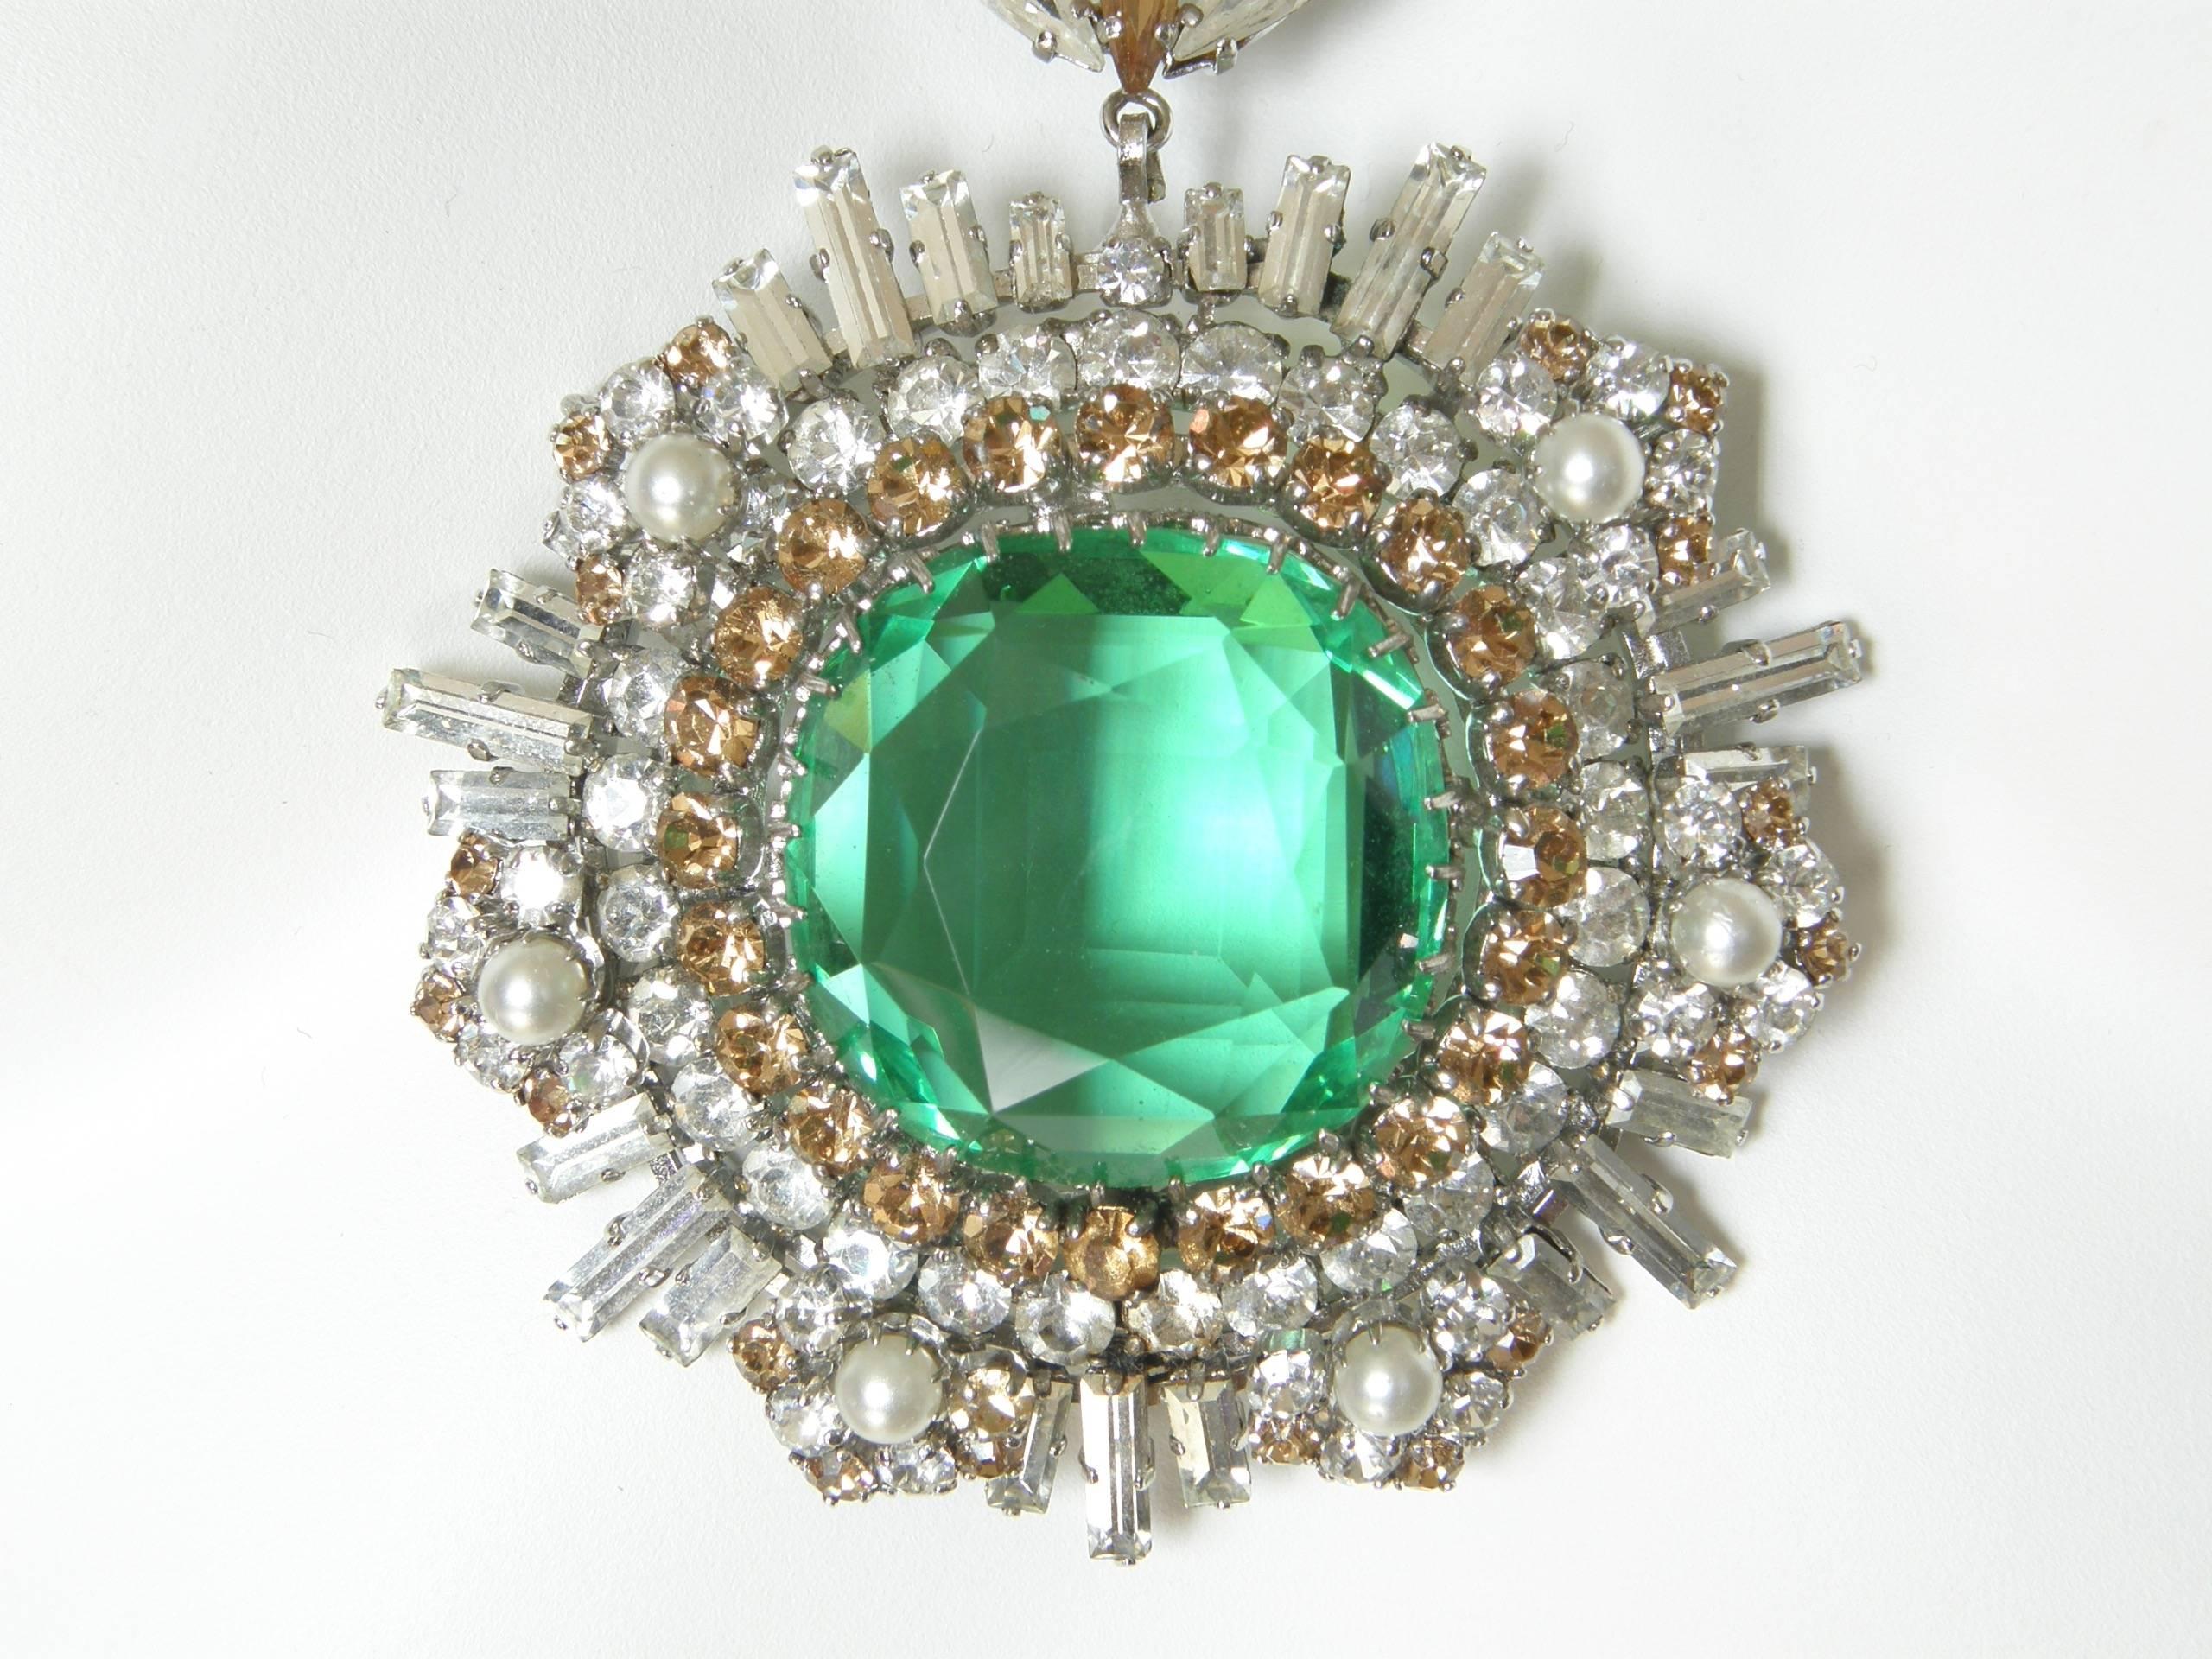 West German Rhinestone Necklace with Faux Emeralds Diamonds and Citrines 3